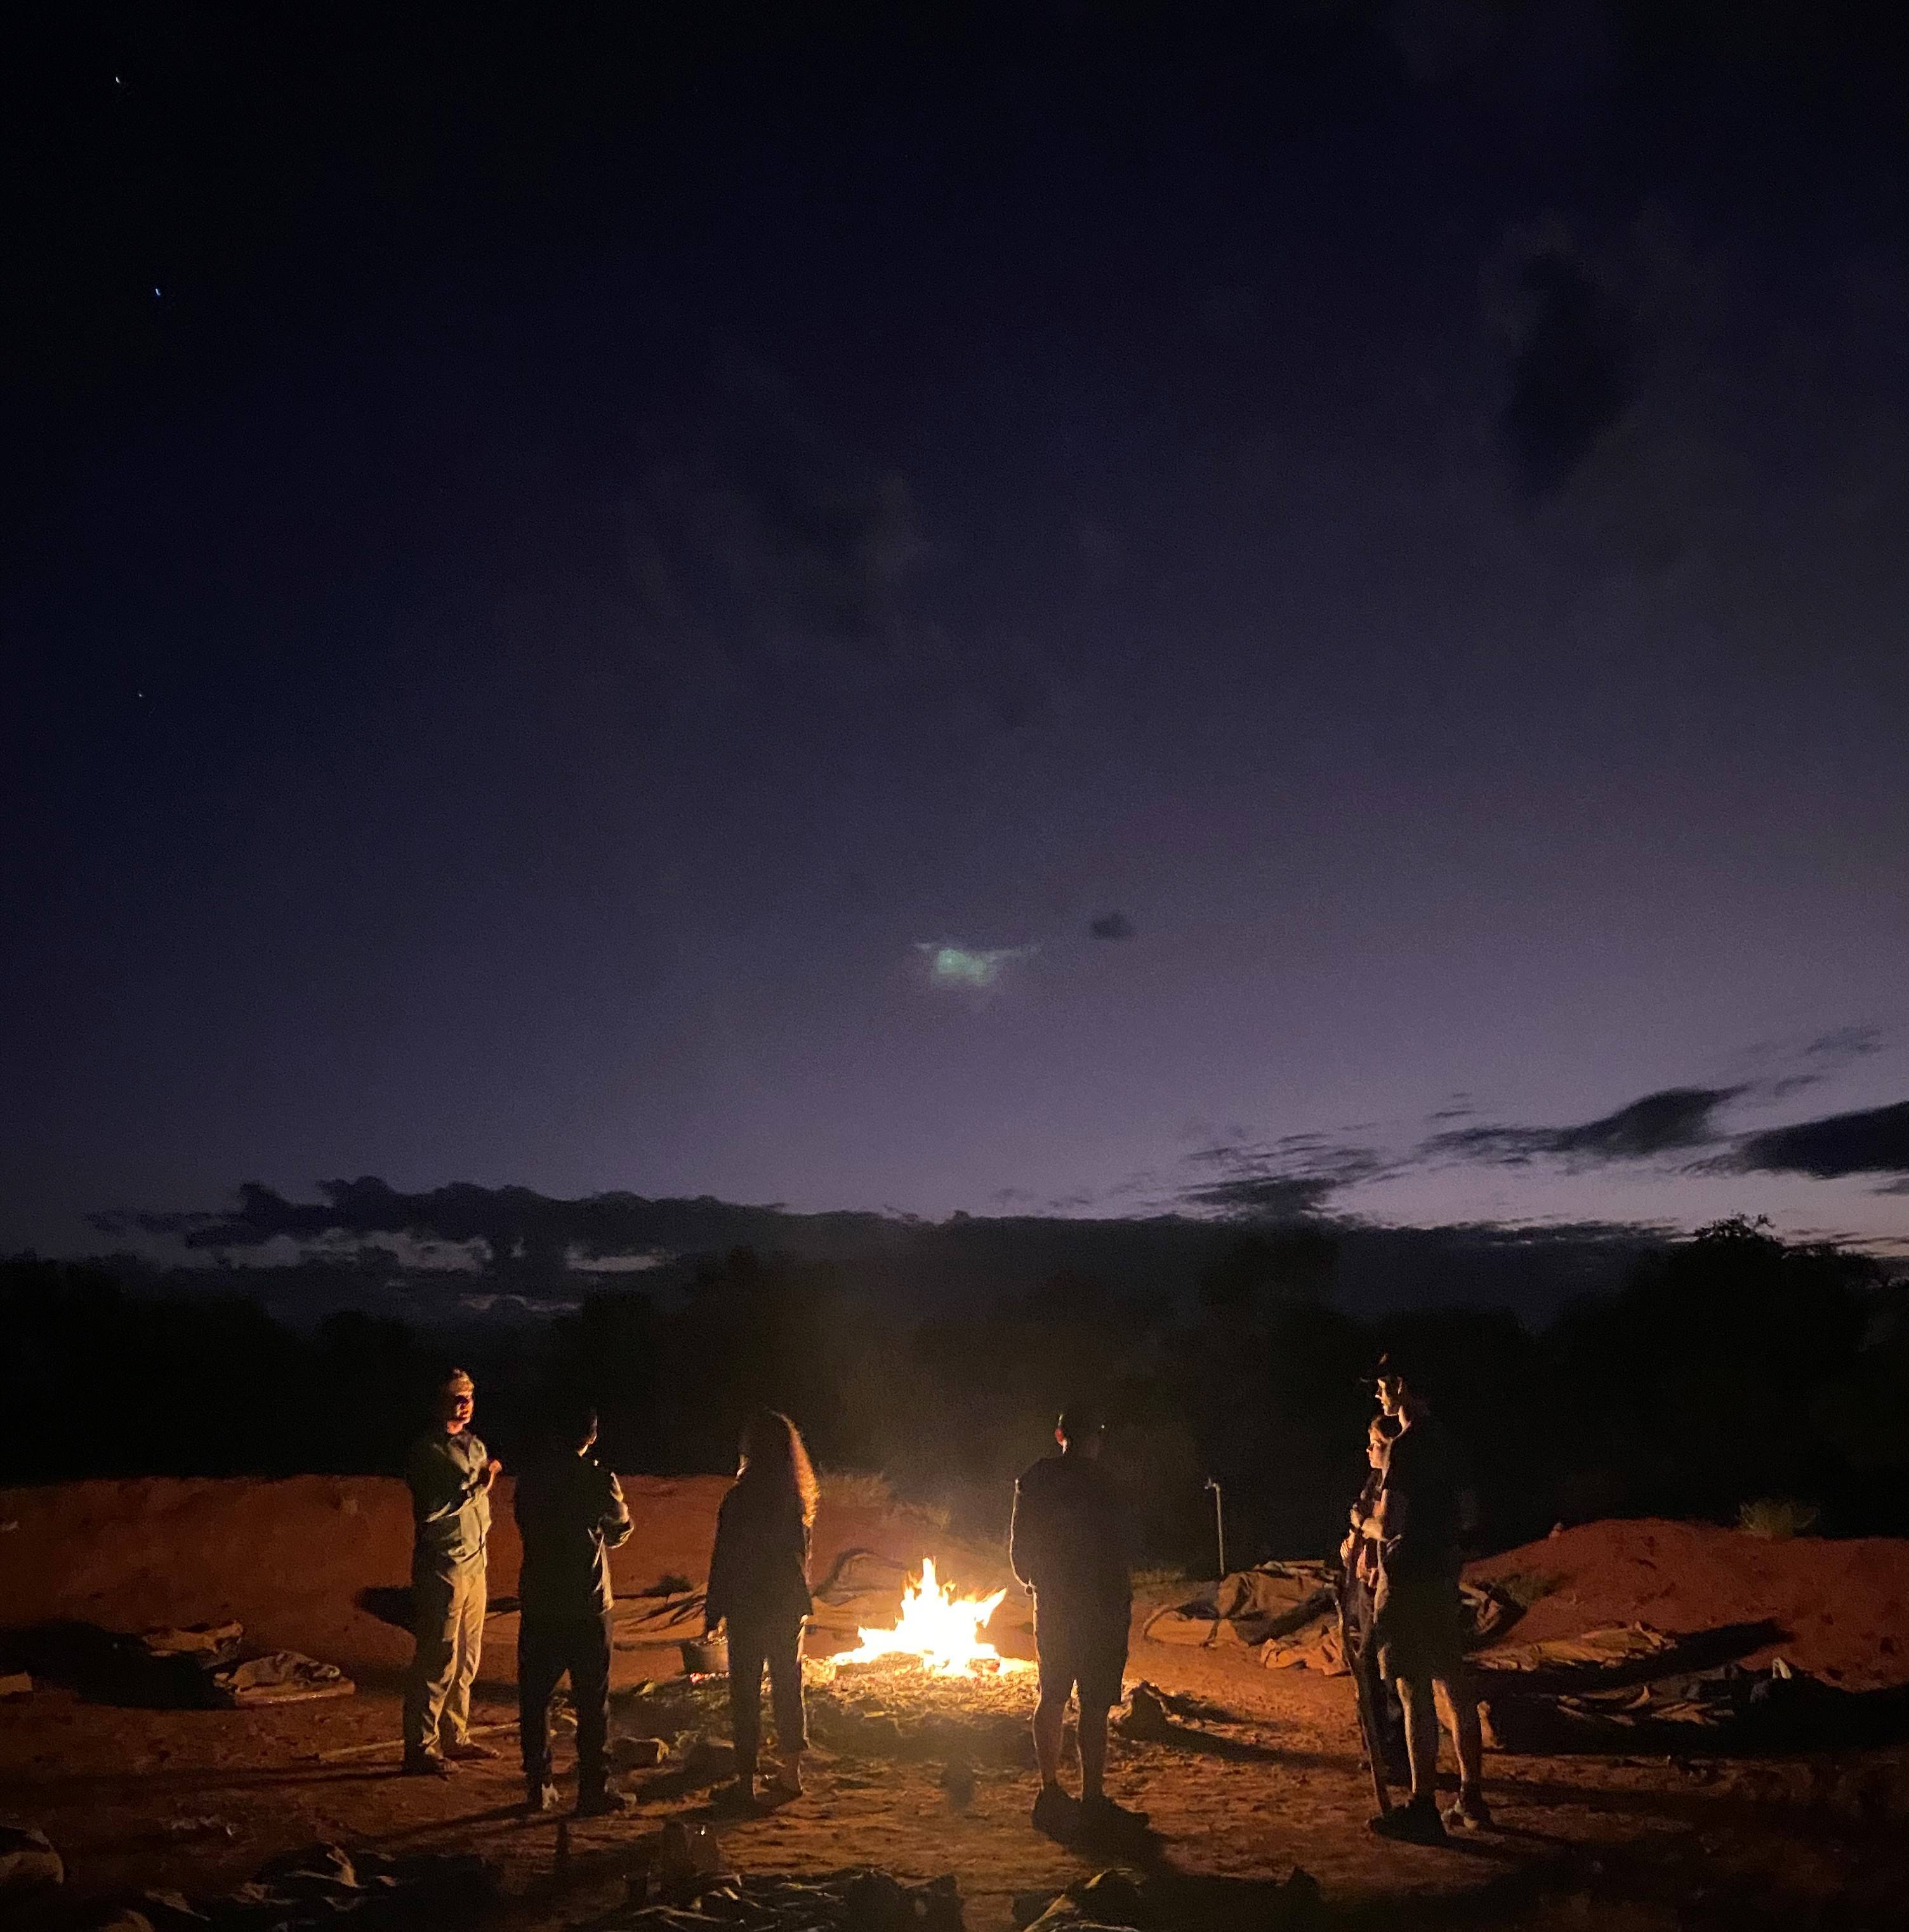 Nighttime campfire in the Australian Outback